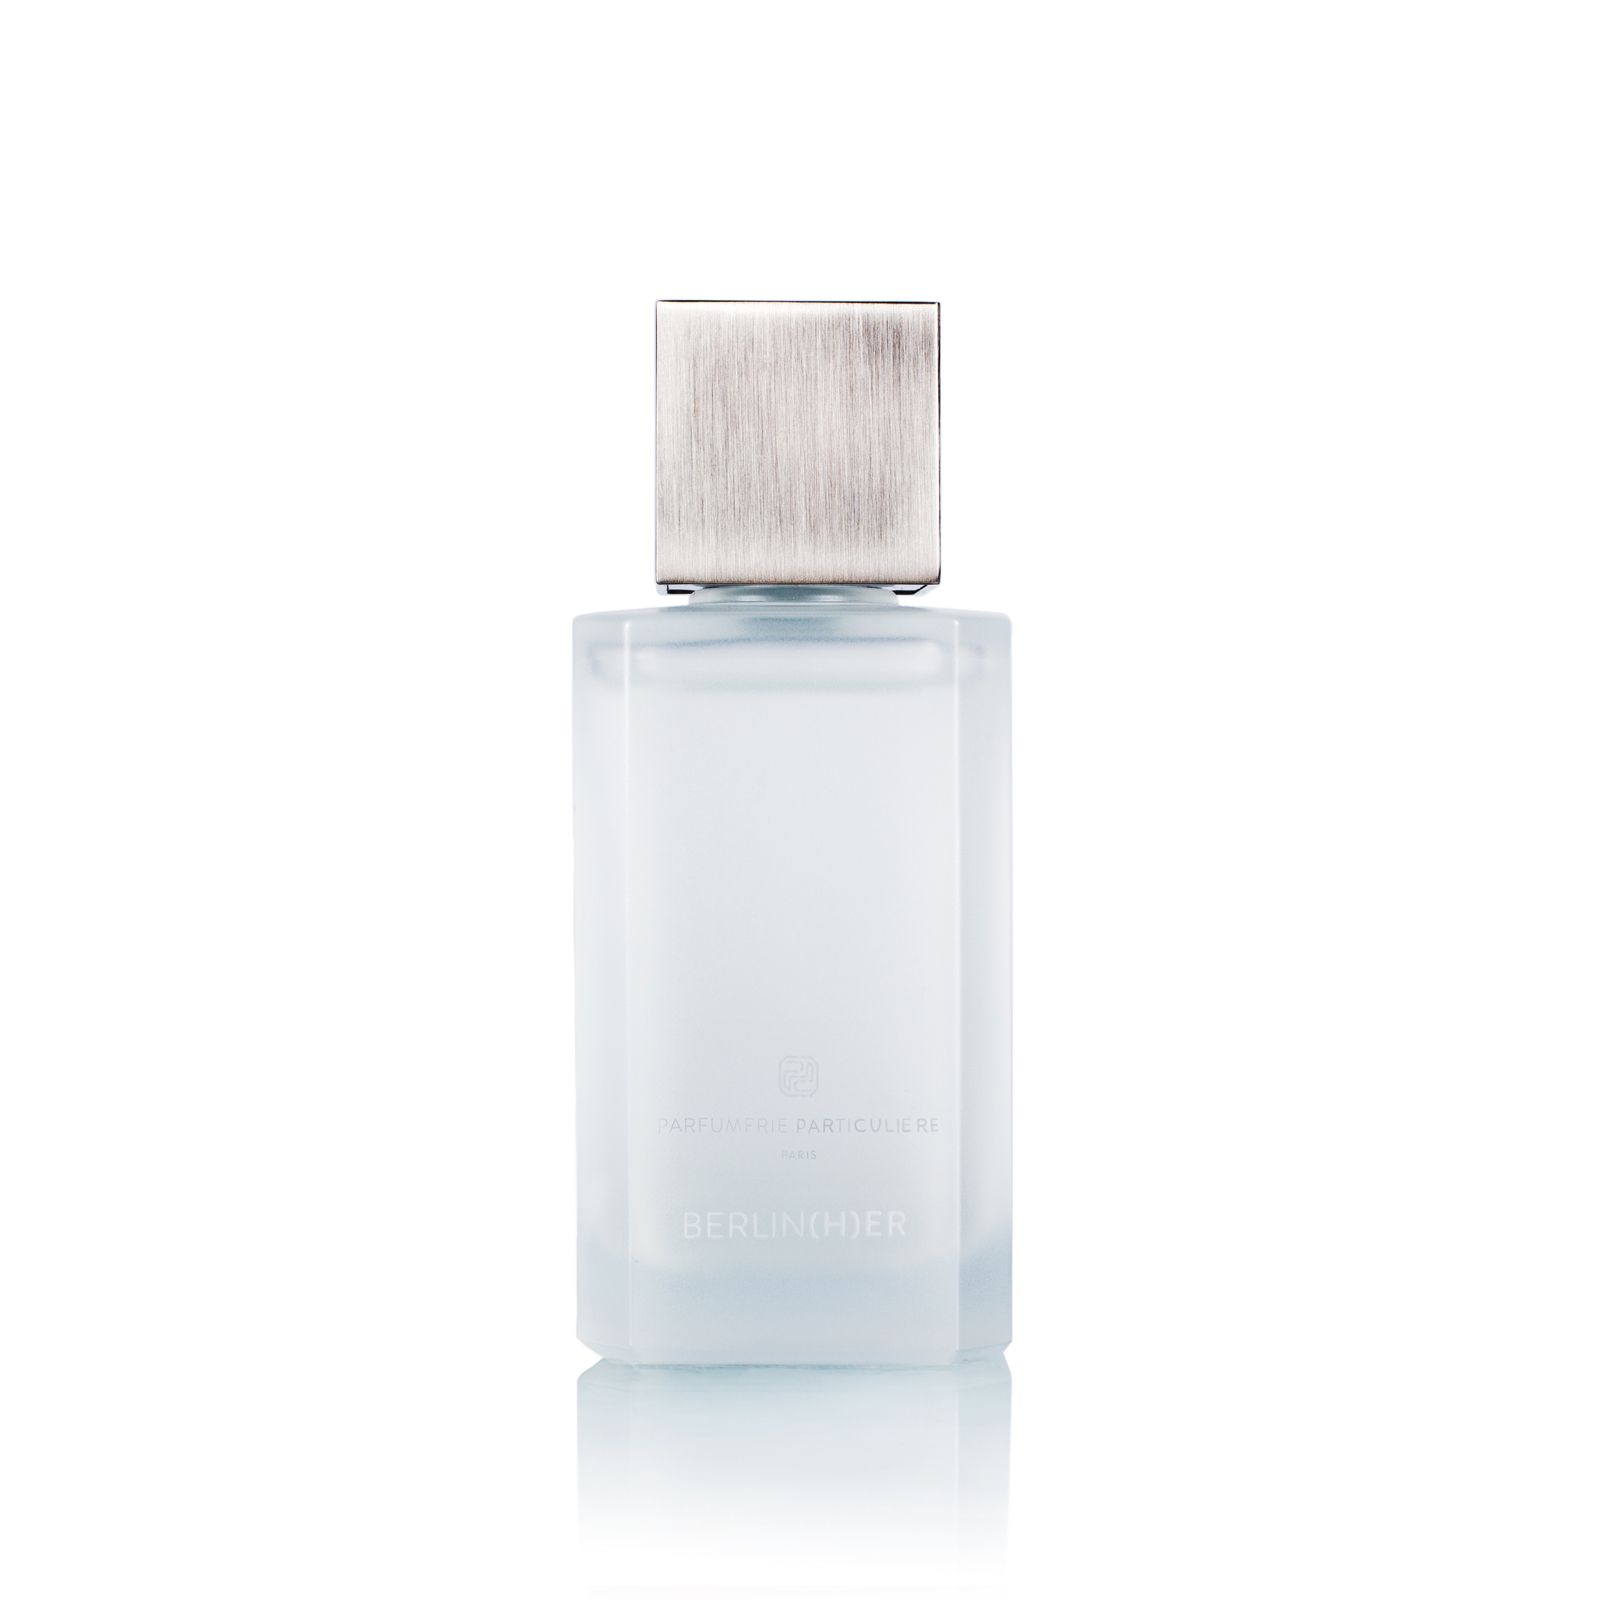 Berlin(h)er Parfumerie Particulière perfume - a fragrance for women and ...